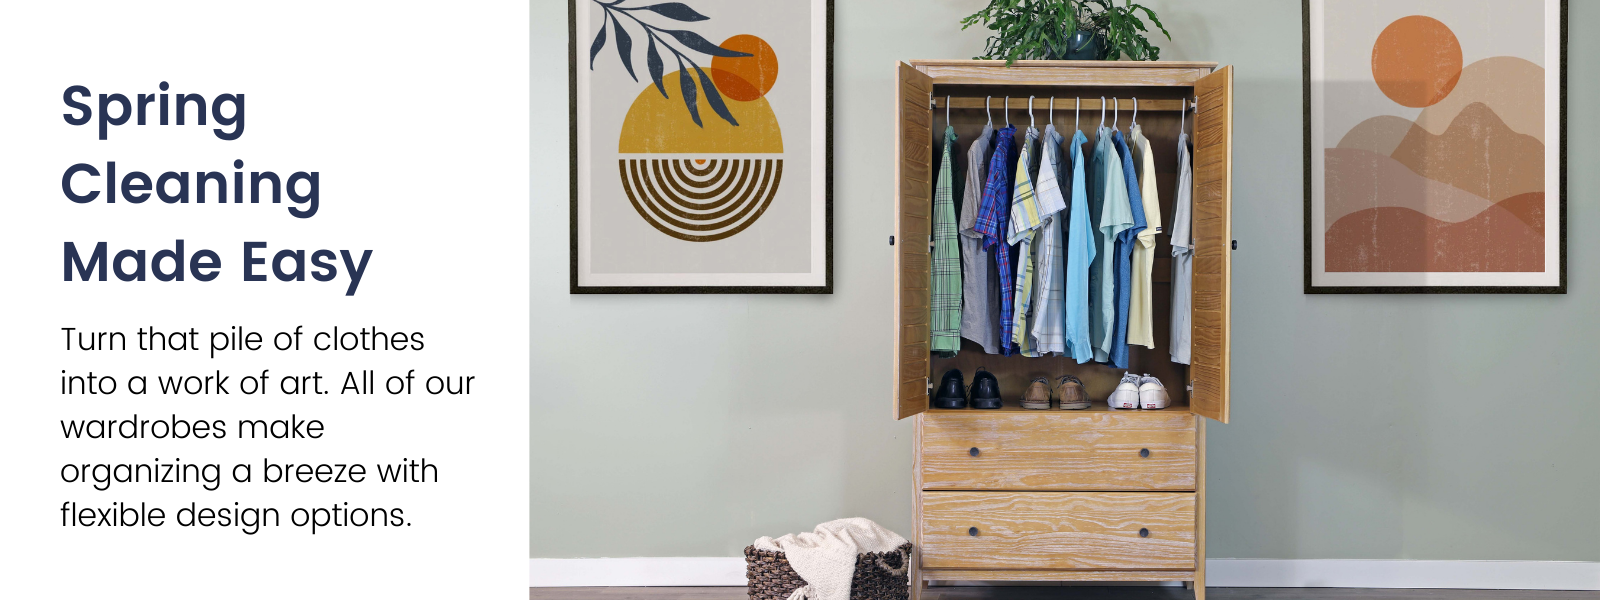 Turn that pile of clothers into a work of art. All of our wardrobes make organizing a breeze with flexible design options.